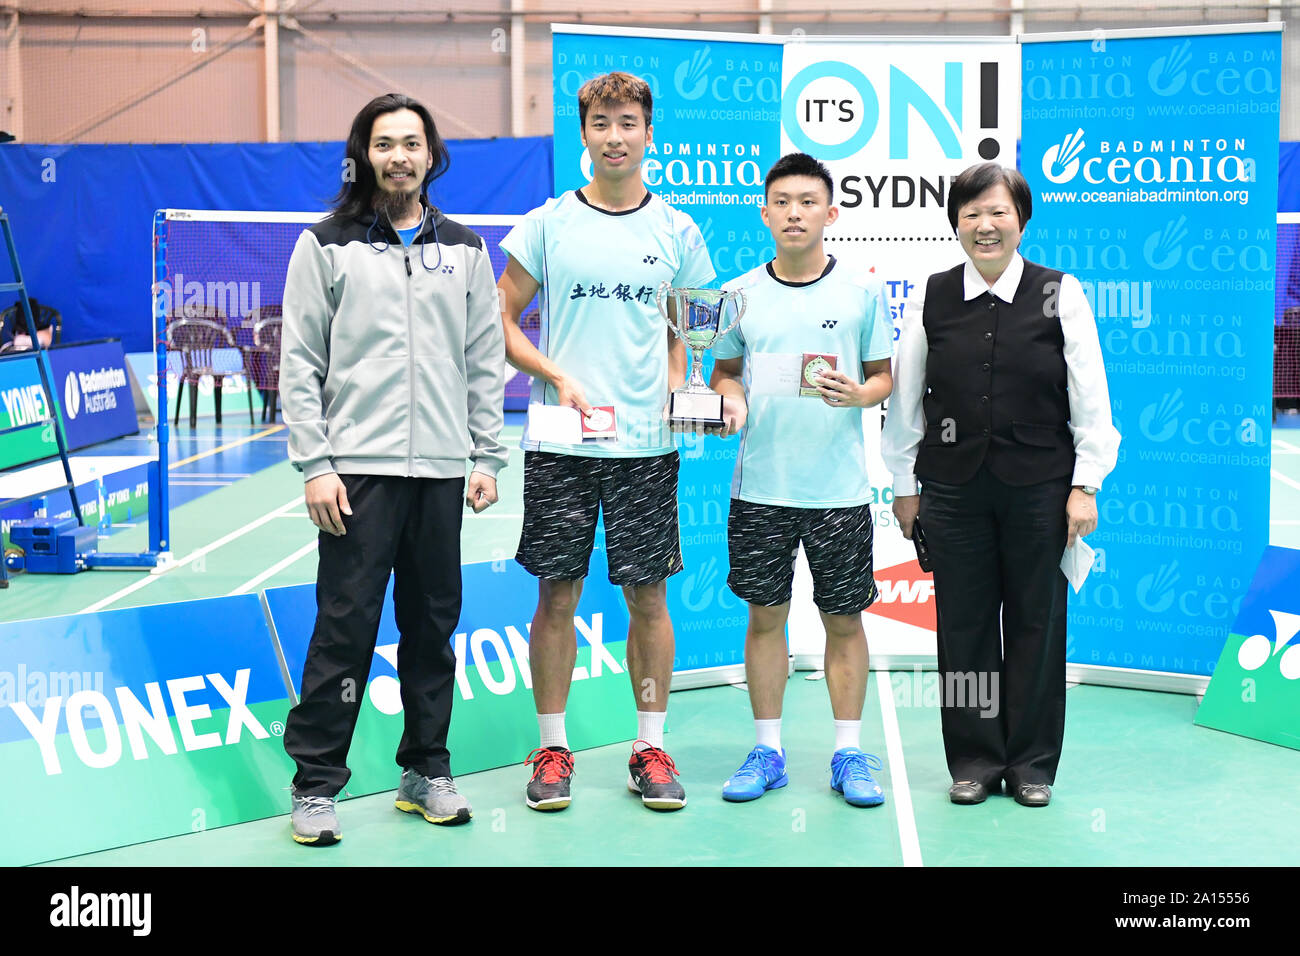 Chen Xin-Yuan and Lin Yu Chieh (Chinese Taipei) seen during the  Men's Single medal awarding ceremony of the 2019 Sydney International, Chen and Lin won the gold medal by defeating Alvin Morada and Peter Gabriel Magnaye (Philippines), 9-21, 21-11, 21-15.  From left to right: Yonex Australia area manager Michael Fariman, Chen, Lin and Badminton NSW President Carolyn Toh. Stock Photo